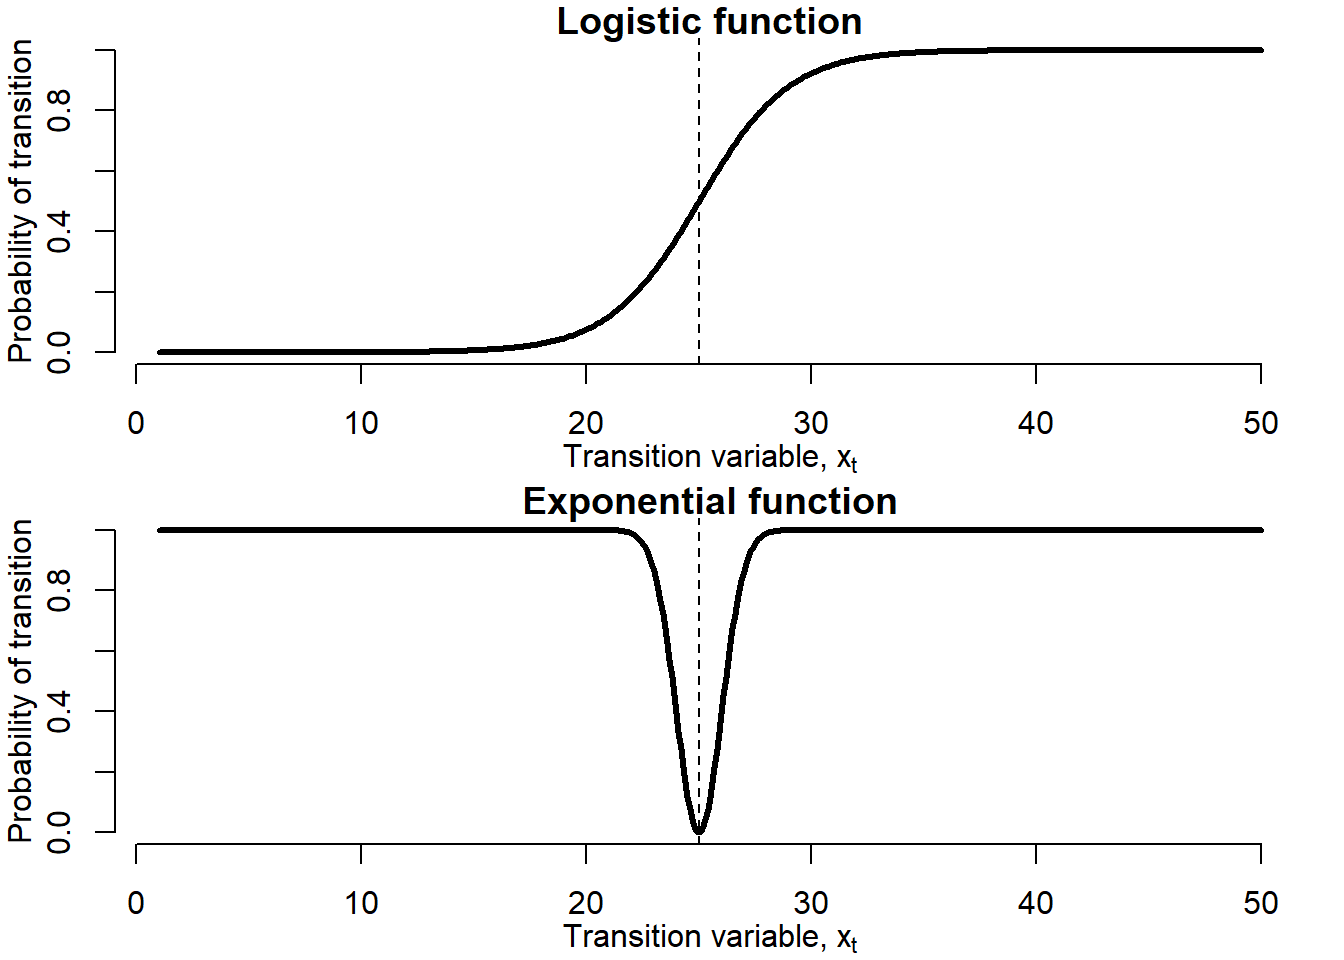 Logistic and exponential transition functions